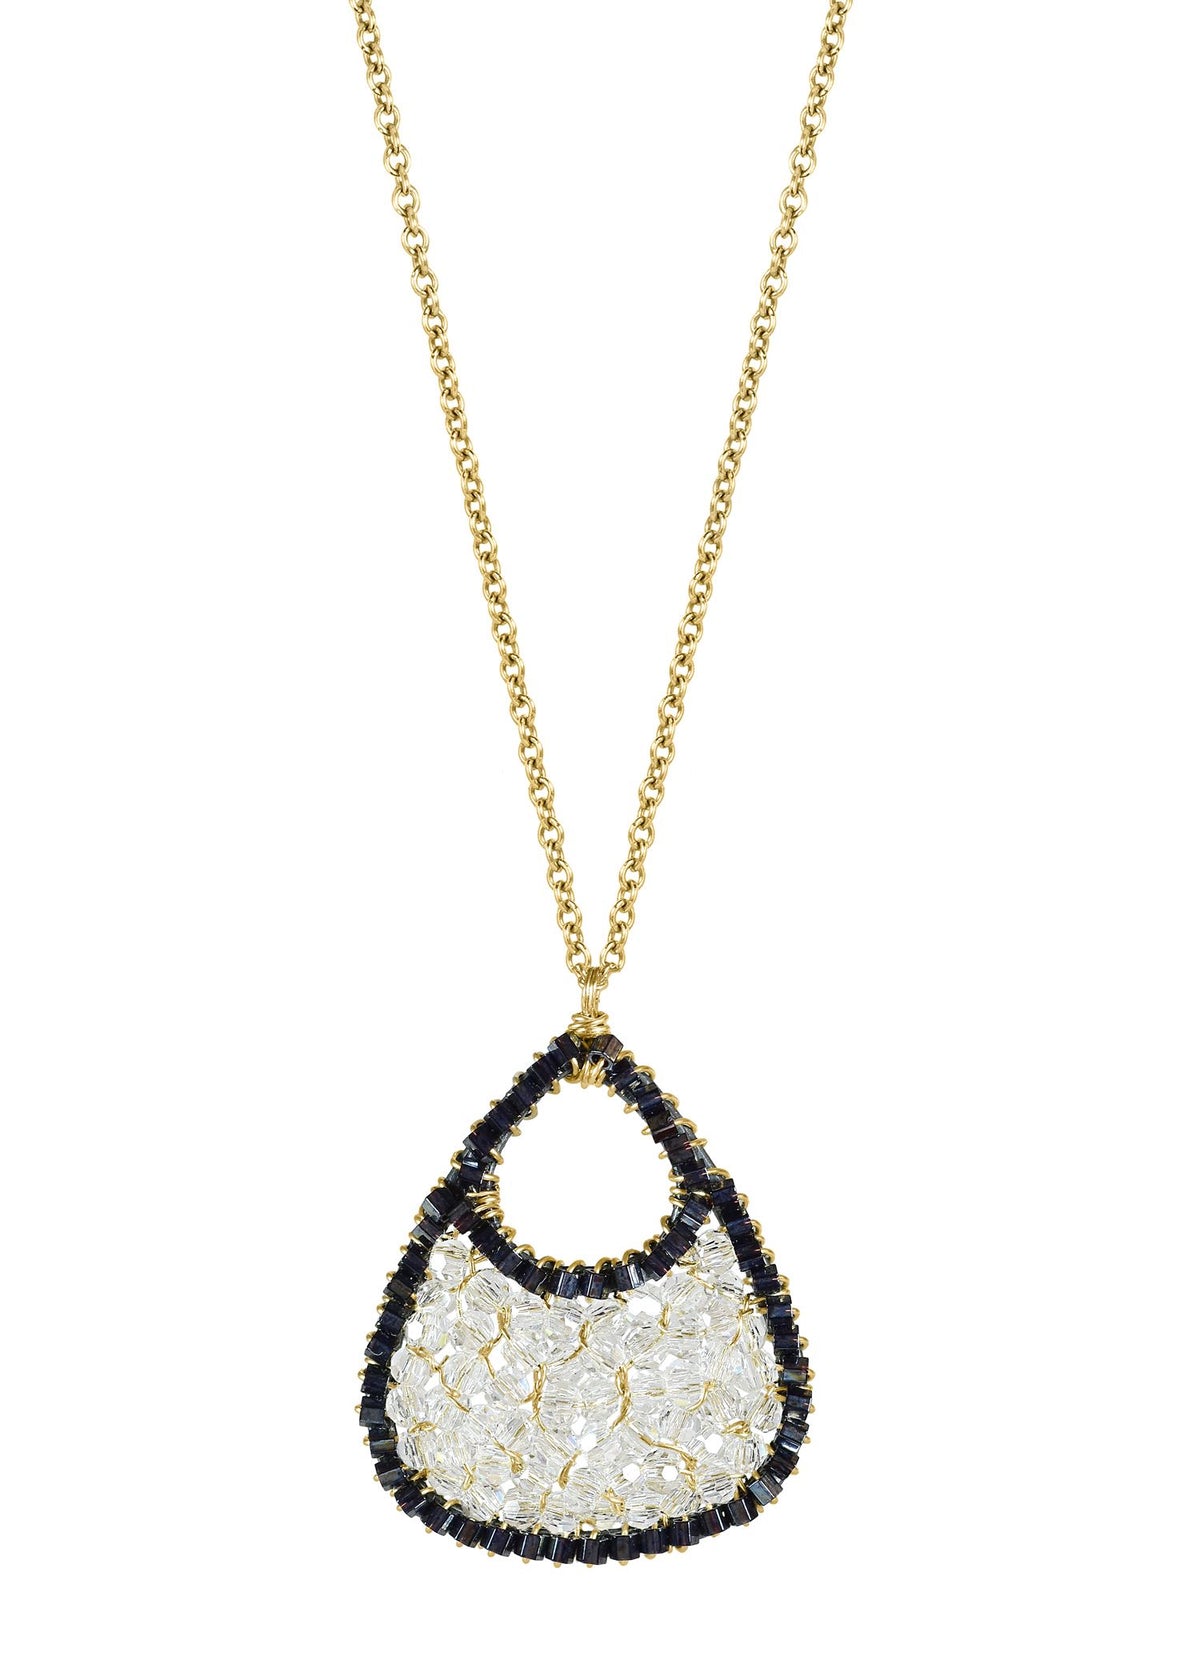 Crystal Dark hematite seed beads 14k gold fill Necklace measures 16-1/4&quot; long Pendant measures 15/16&quot; in length and 3/4&quot; in width Handmade in our Los Angeles studio